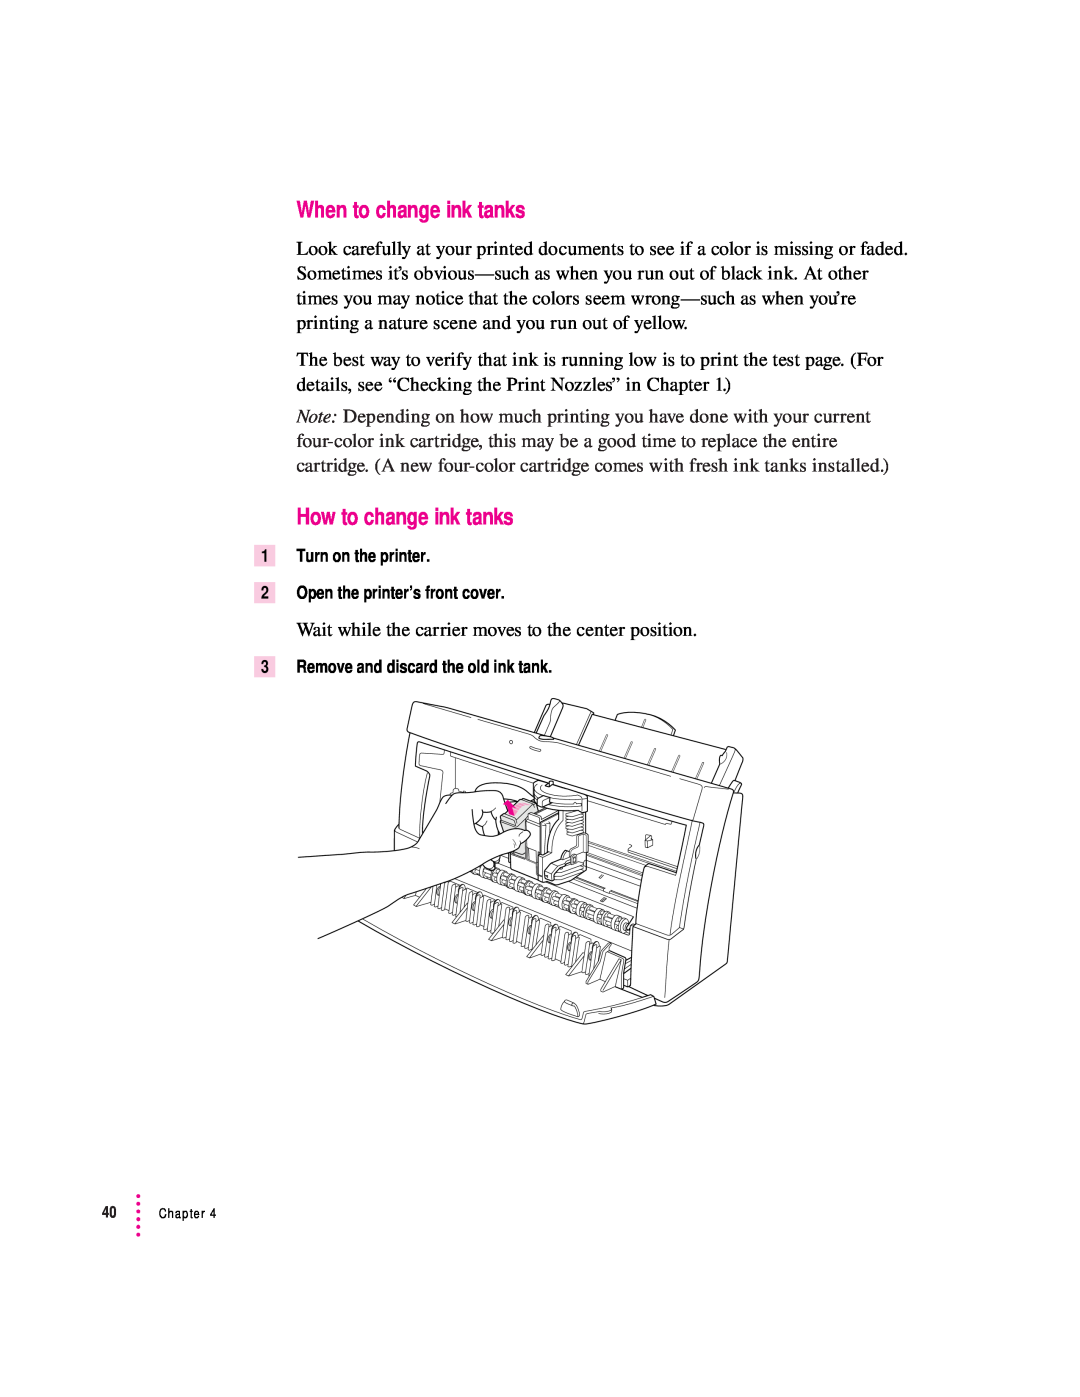 Apple 2400 manual When to change ink tanks, How to change ink tanks, Turn on the printer 2 Open the printer’s front cover 